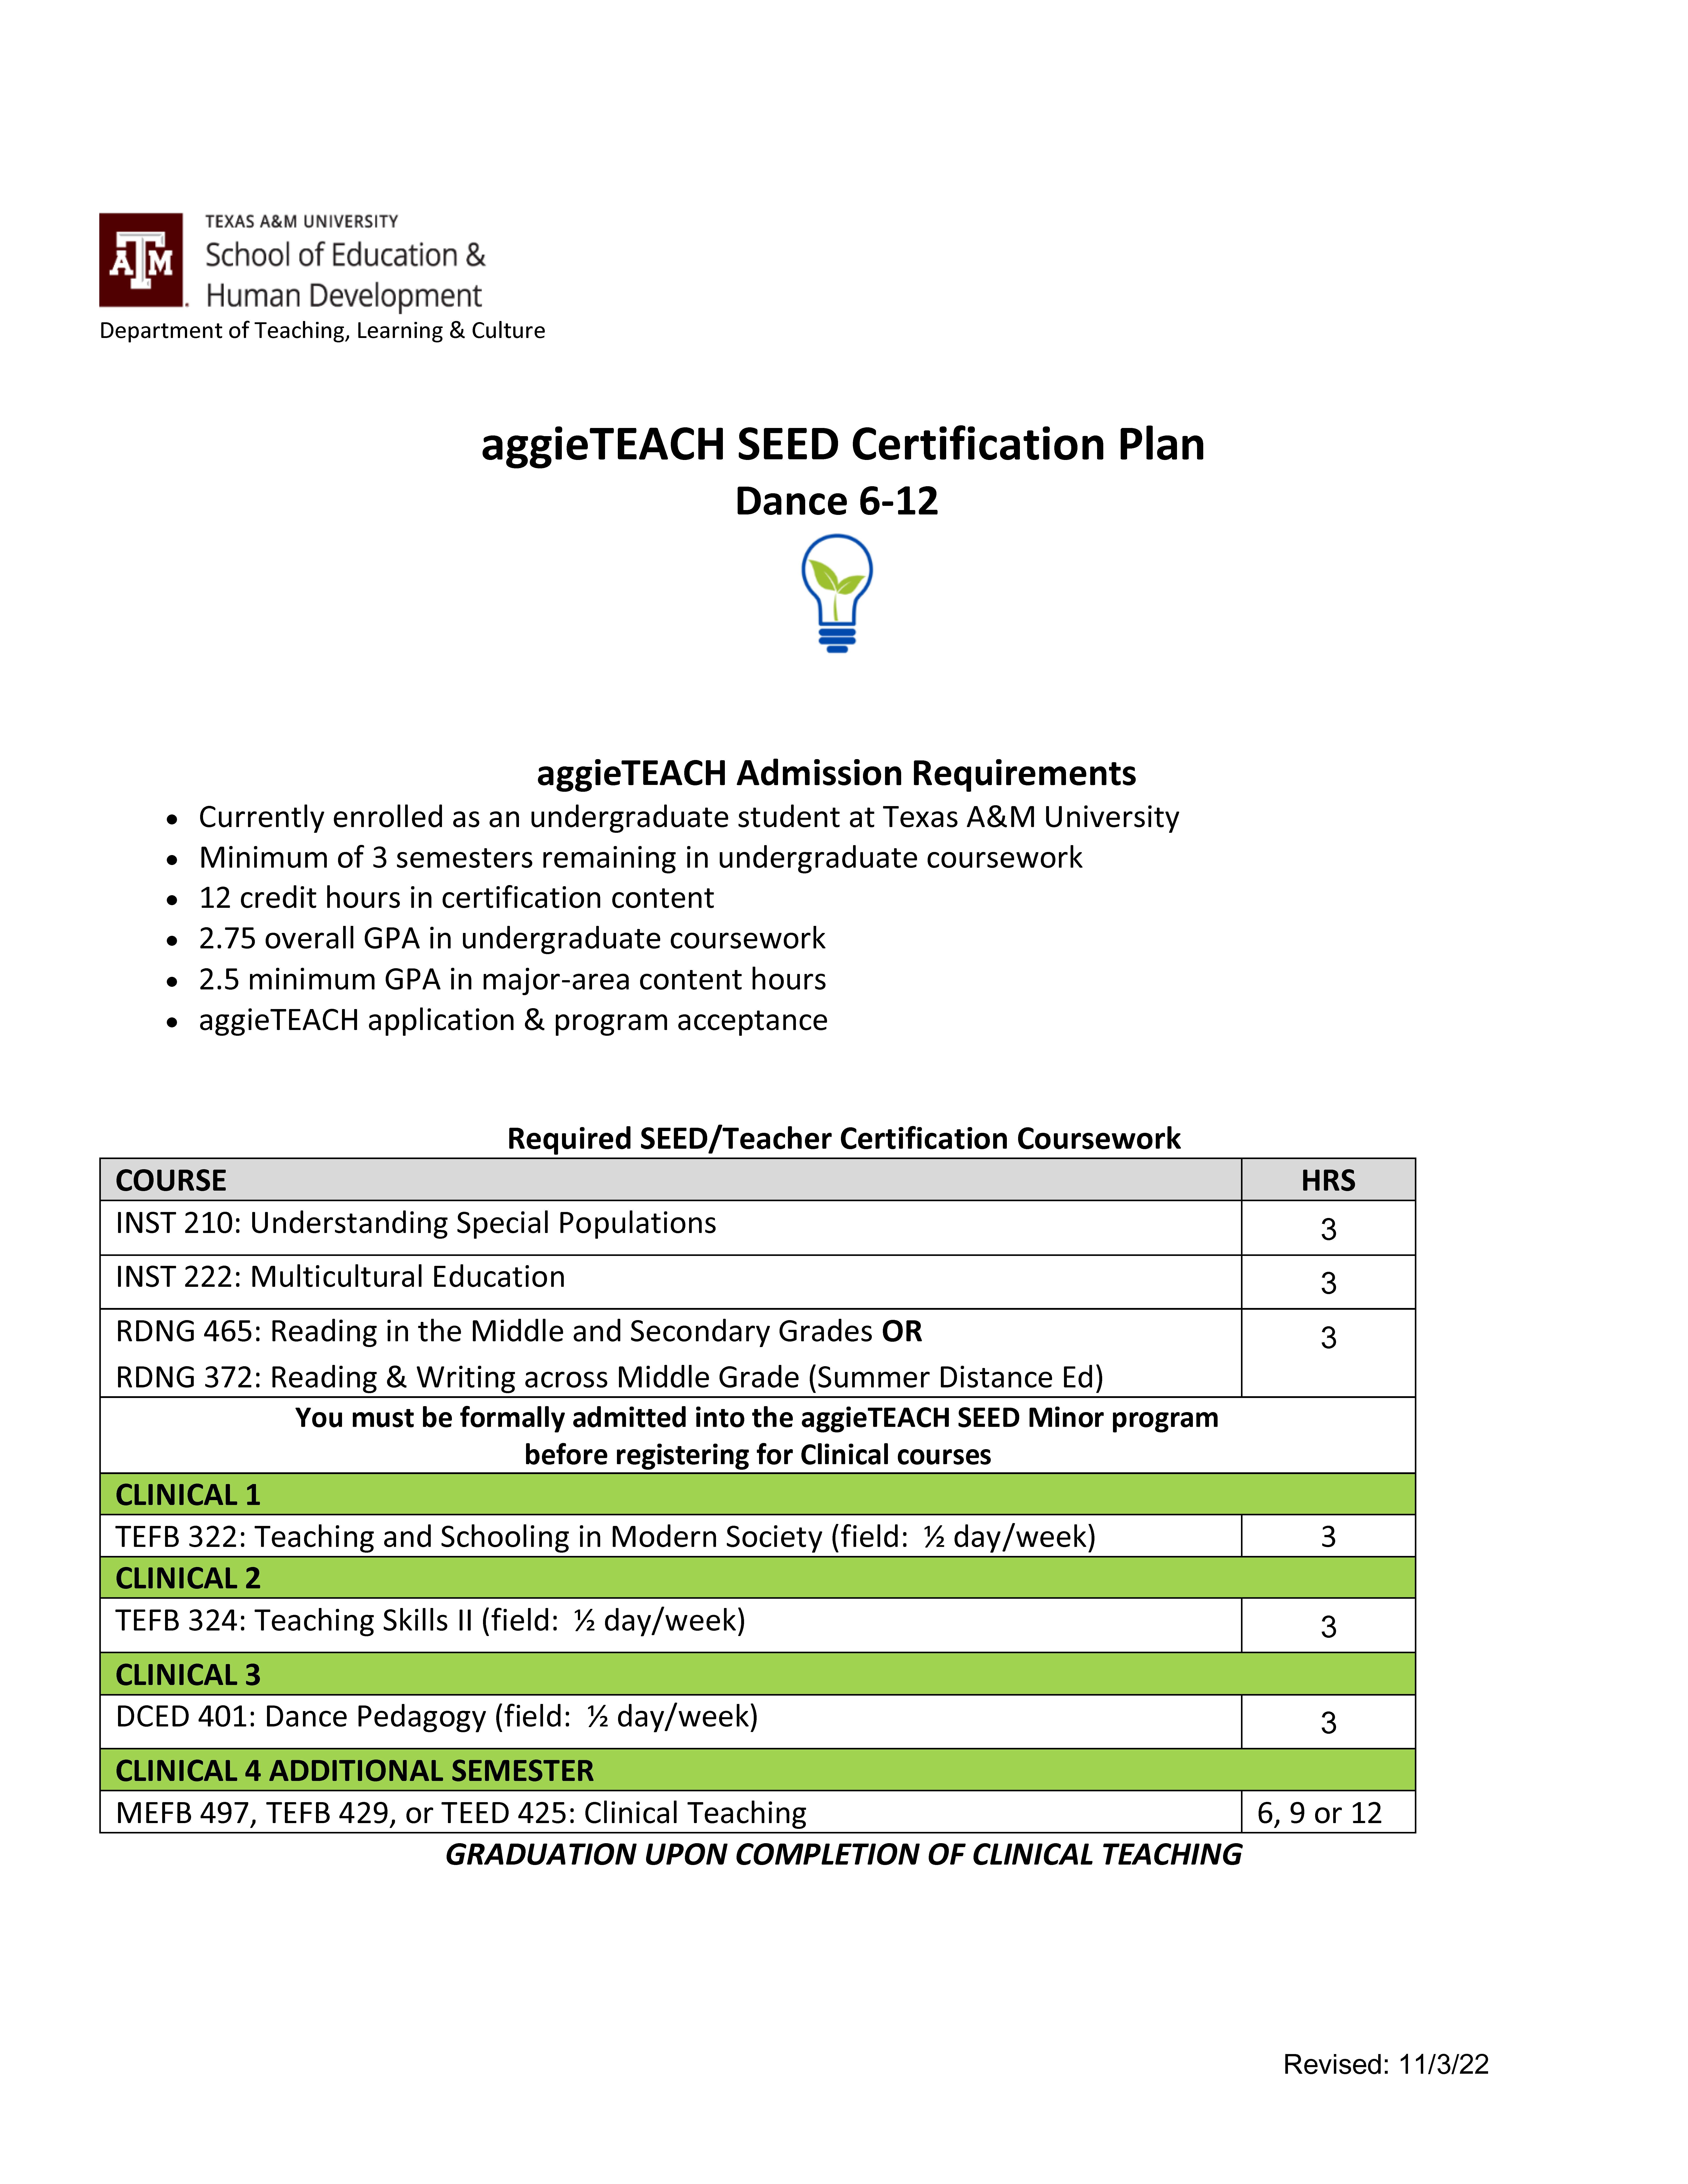 Image of Certification Plan. Click for pdf.